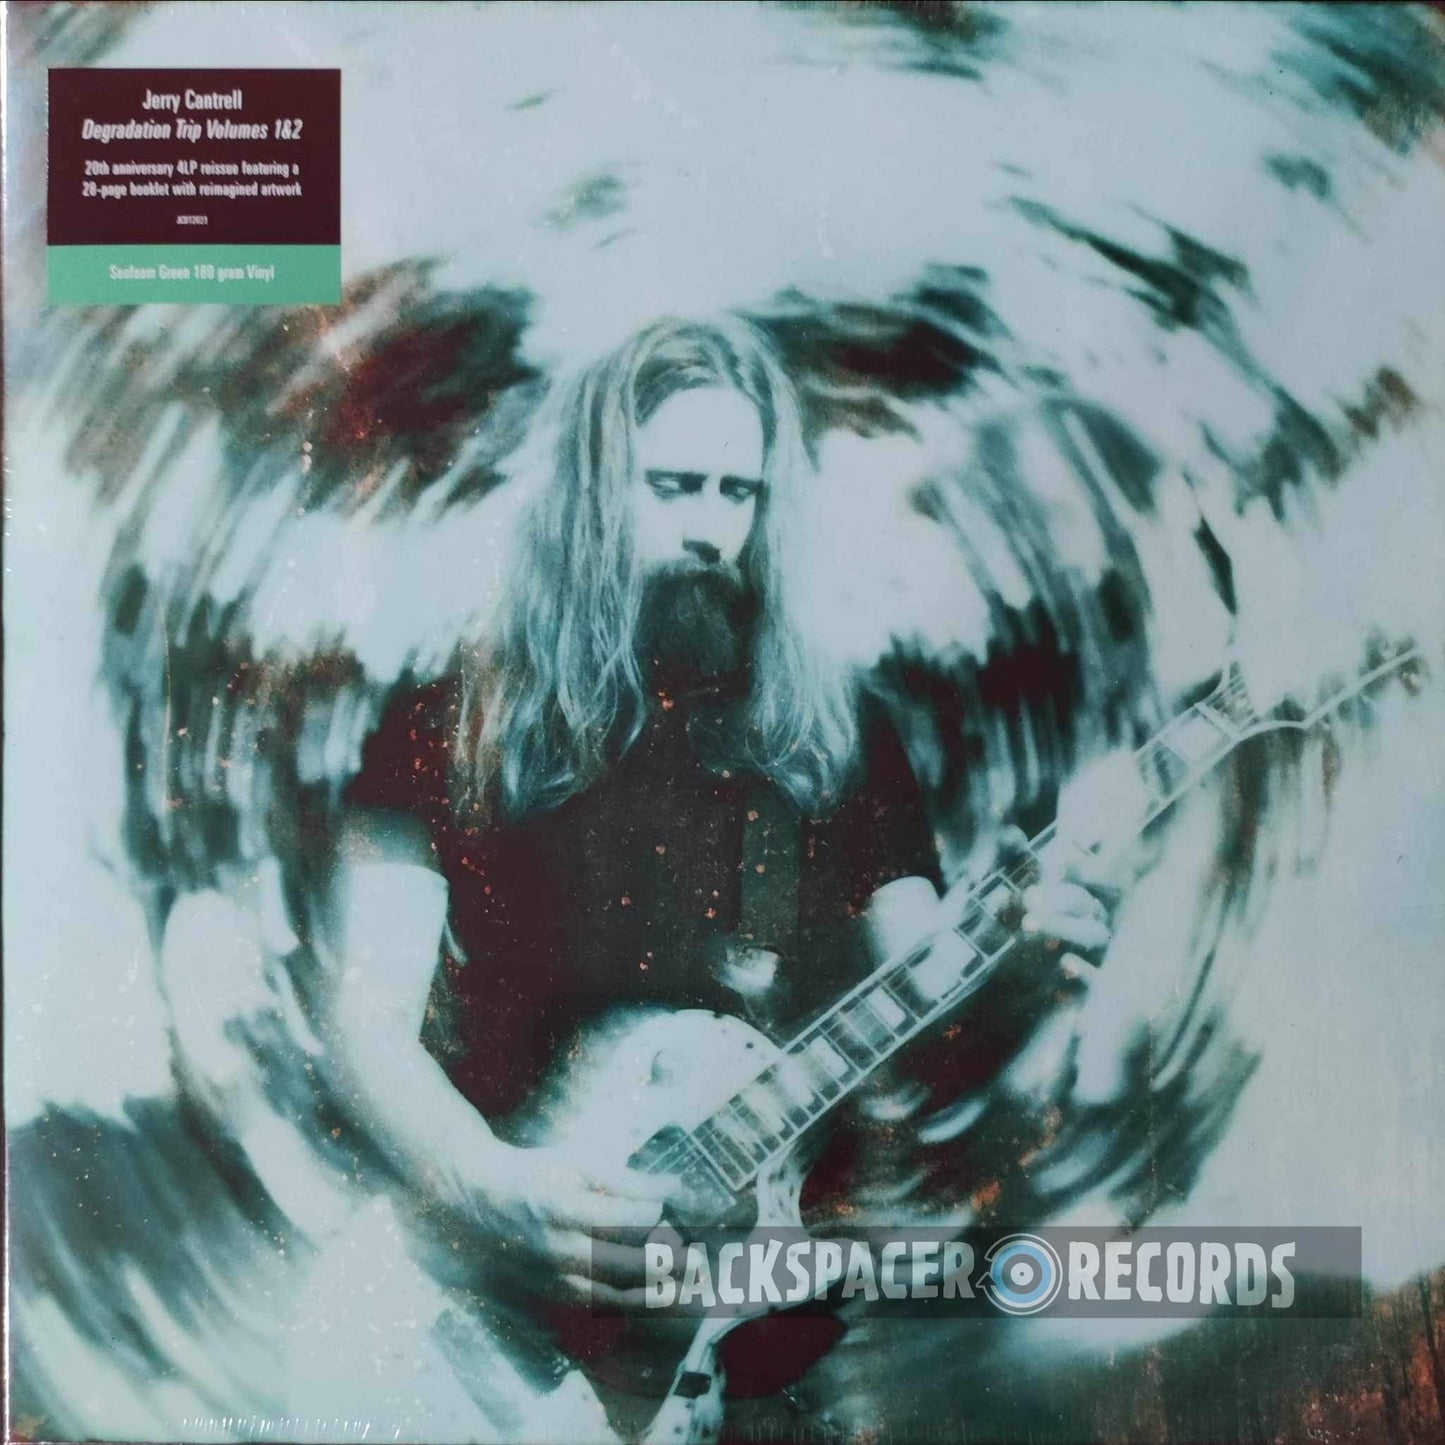 Jerry Cantrell – Degradation Trip Volumes 1 & 2 (Limited Edition) 4-LP Boxset (Sealed)